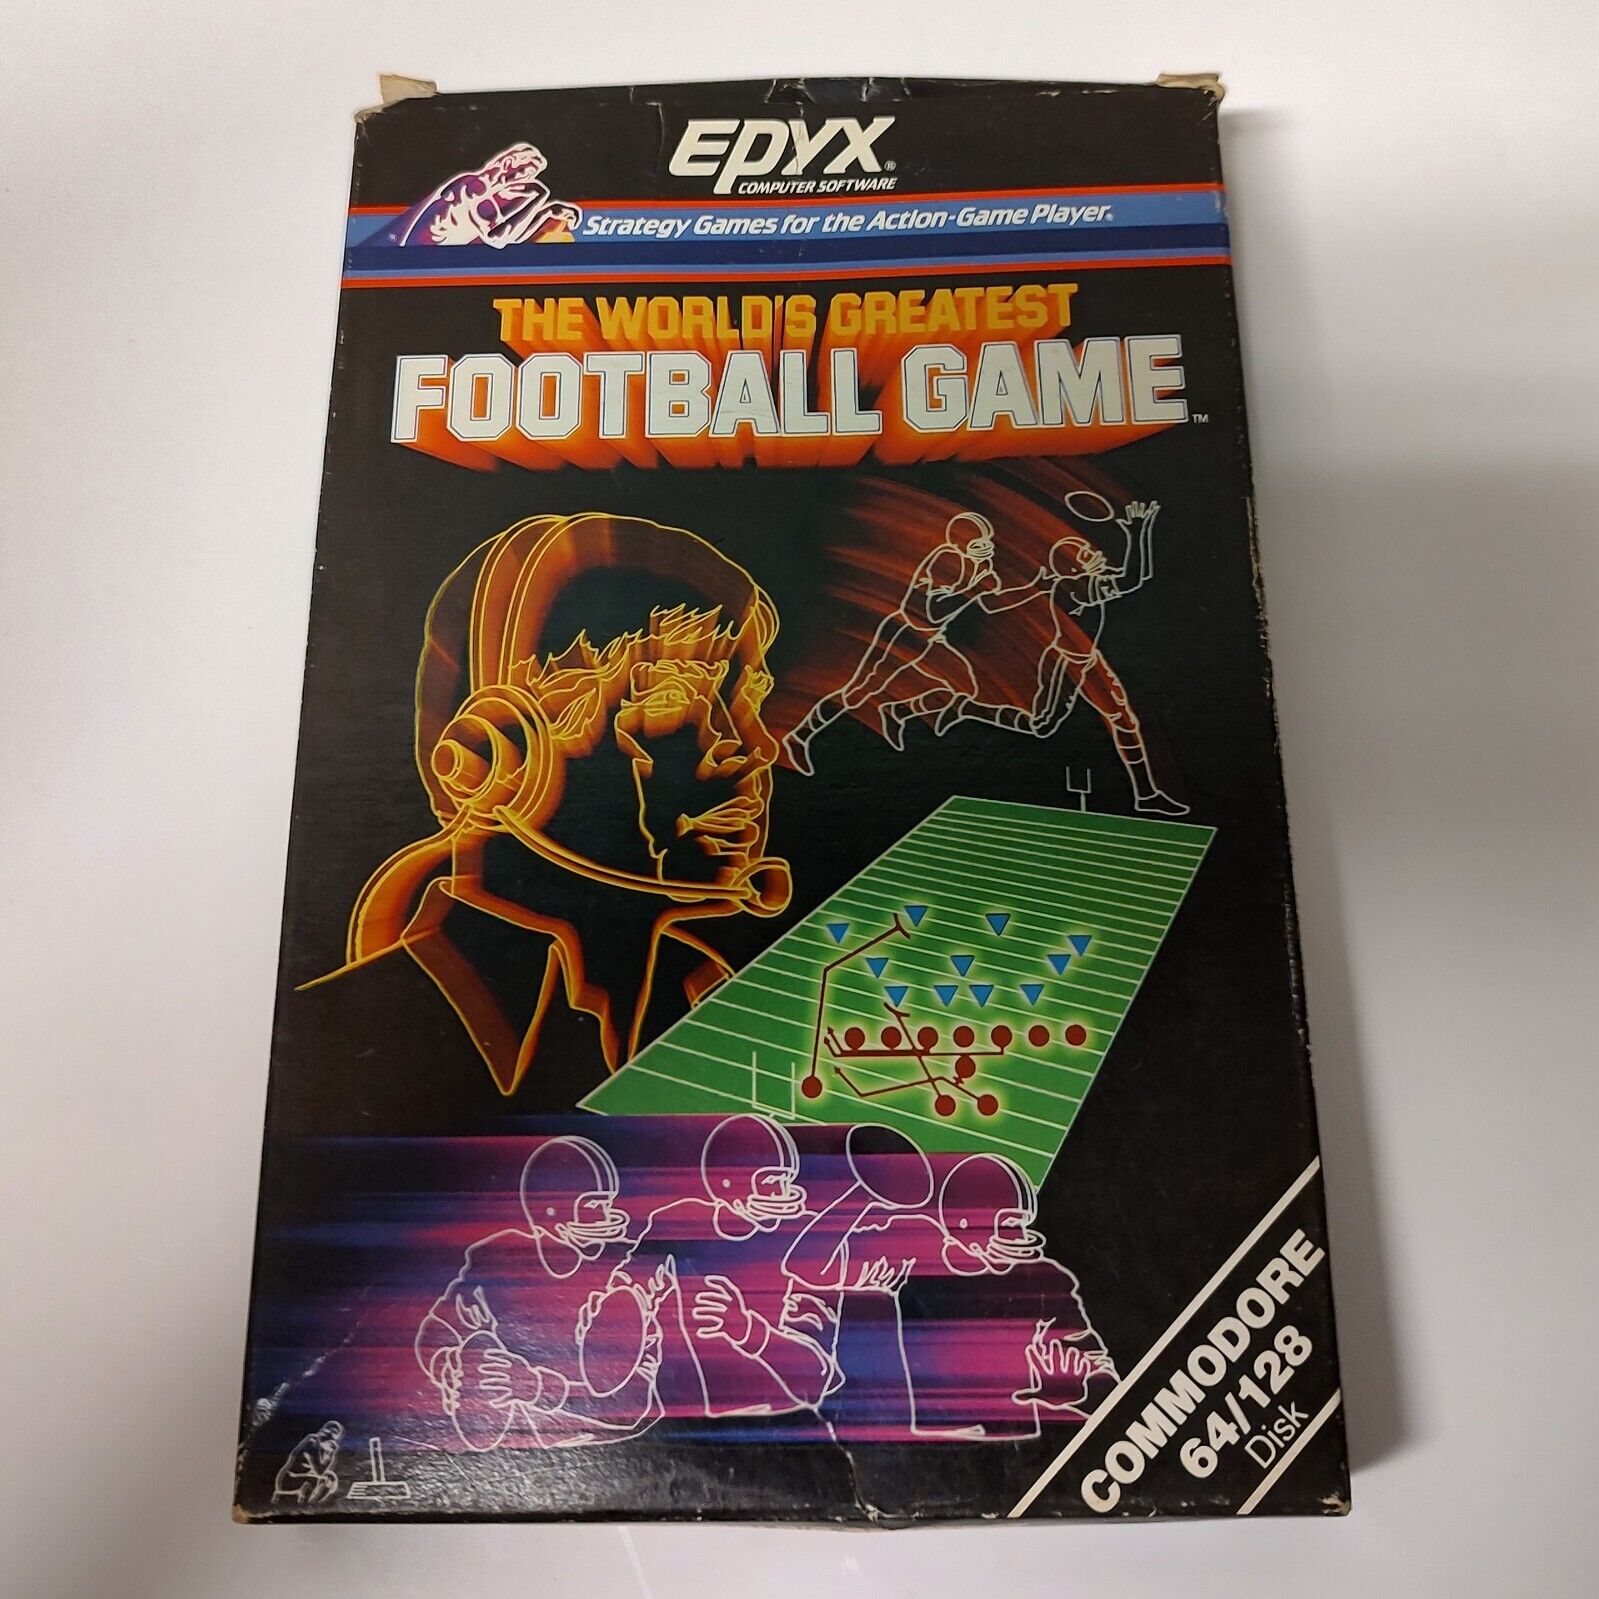 The World's Greatest Football Game  EPYX 1985  Commodore 64 / 128 Vintage Game